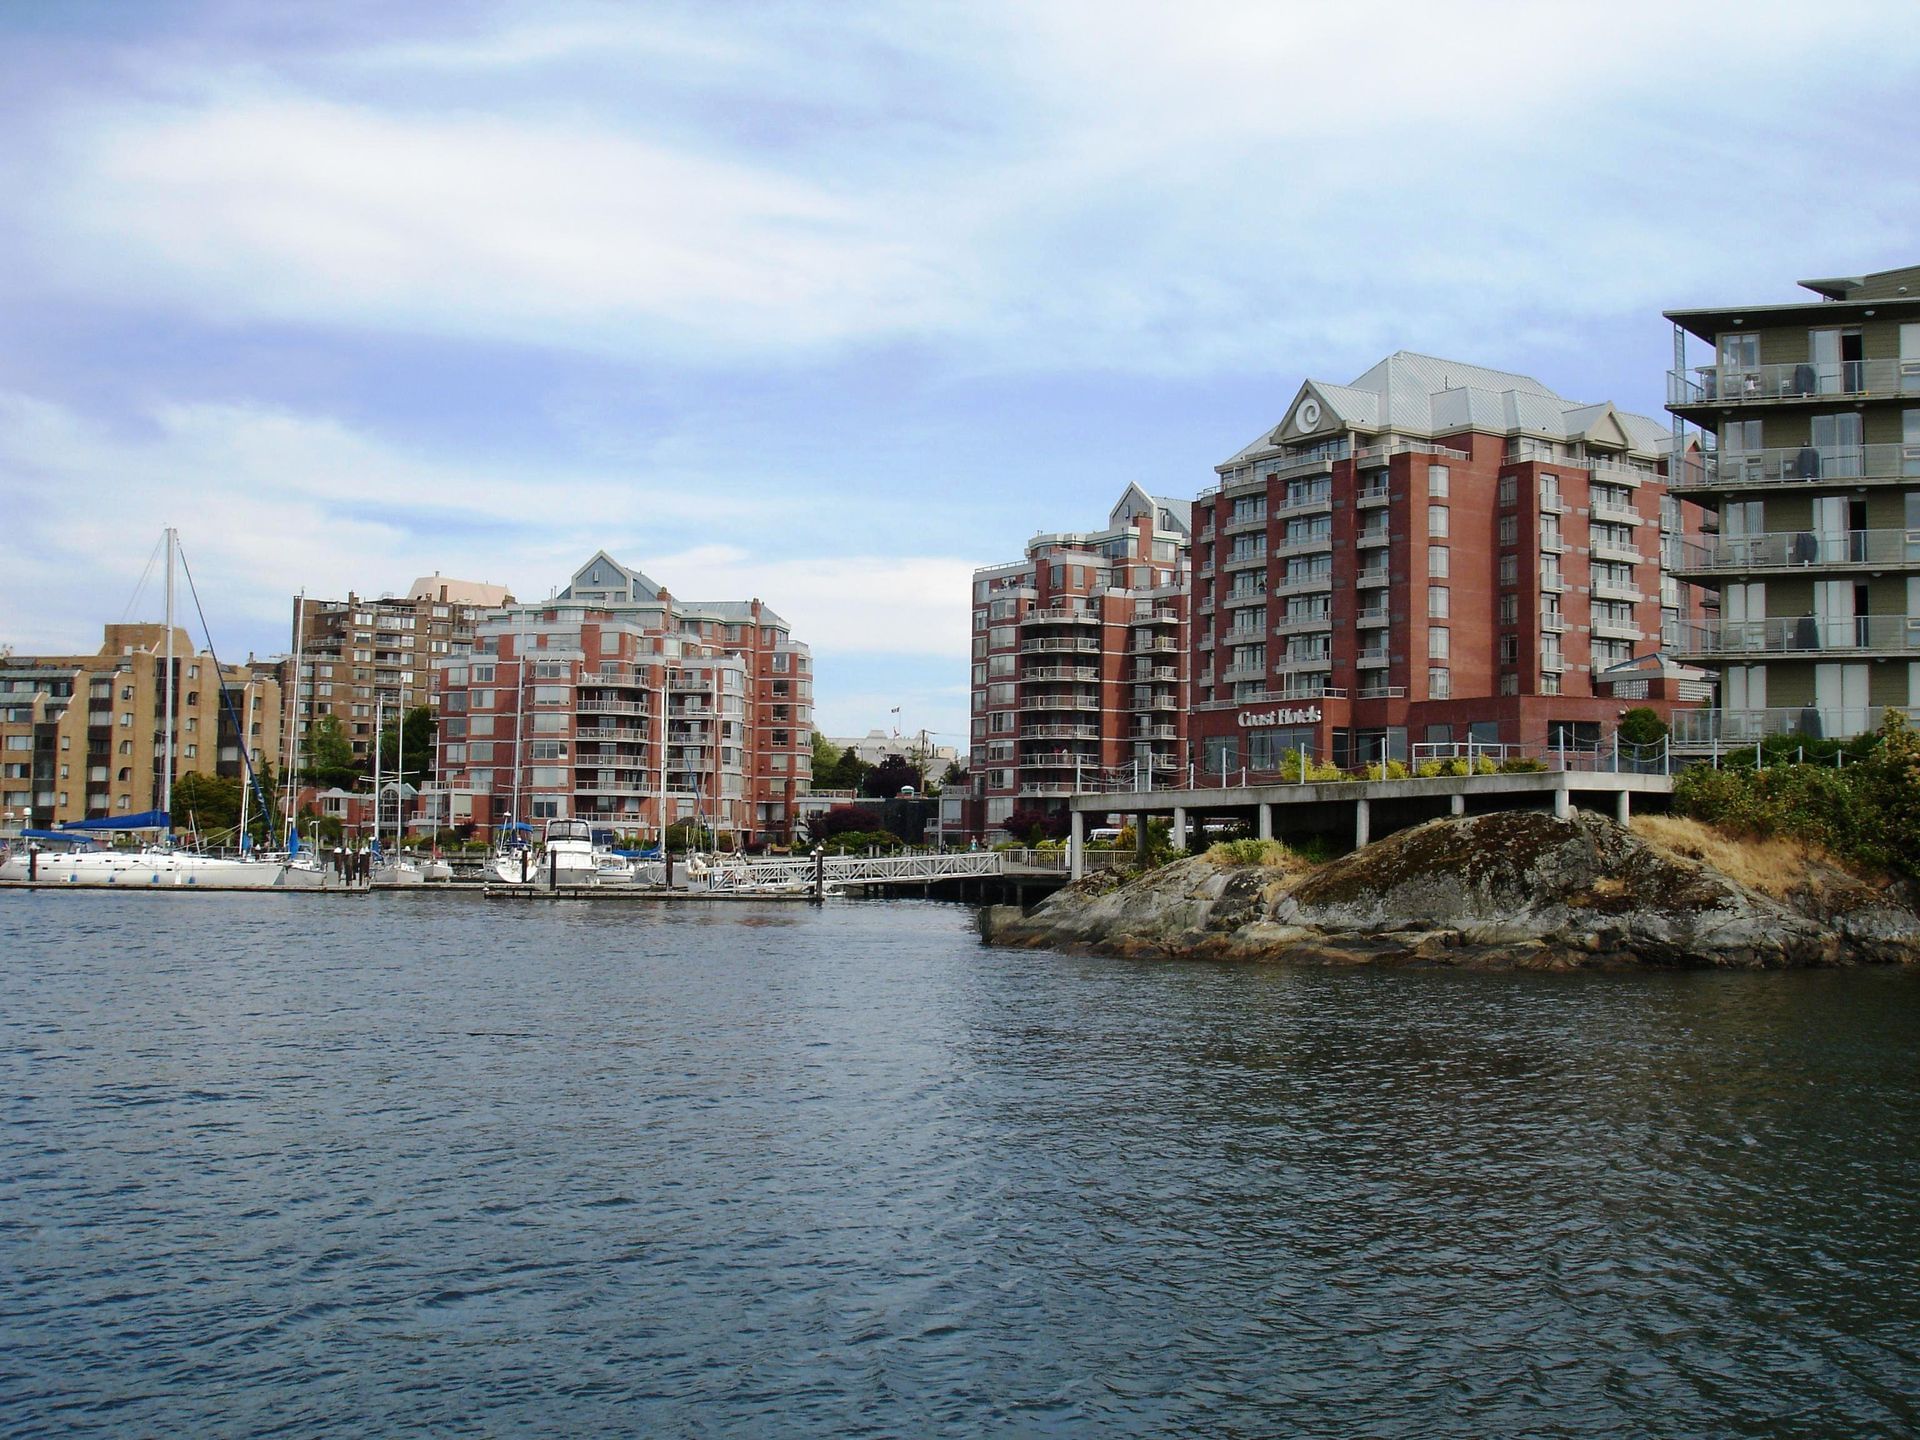 View of Coast Victoria Hotel & Marina by APA from the water